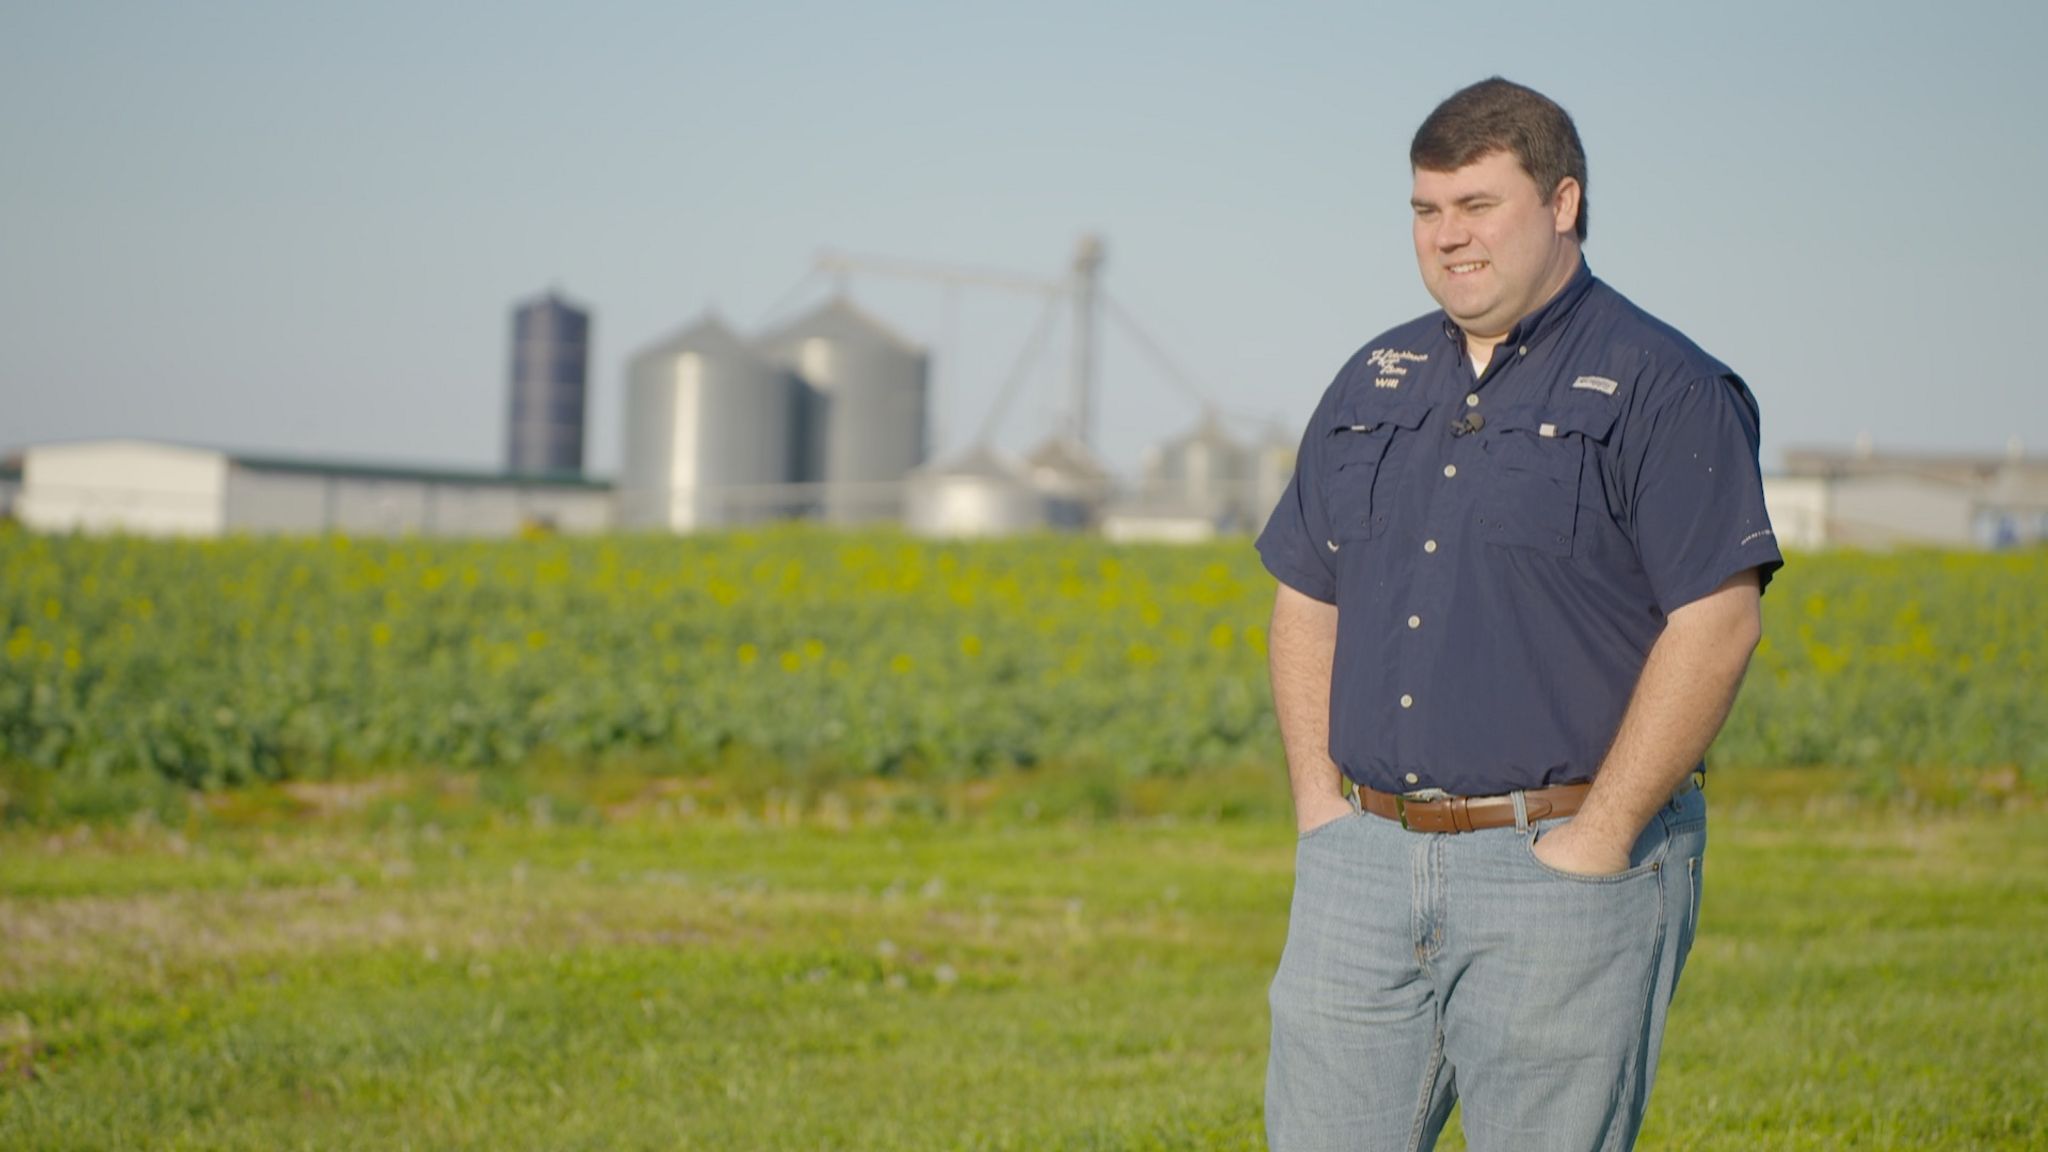 Will Hutchinson is a fourth generation farmer from Tennessee